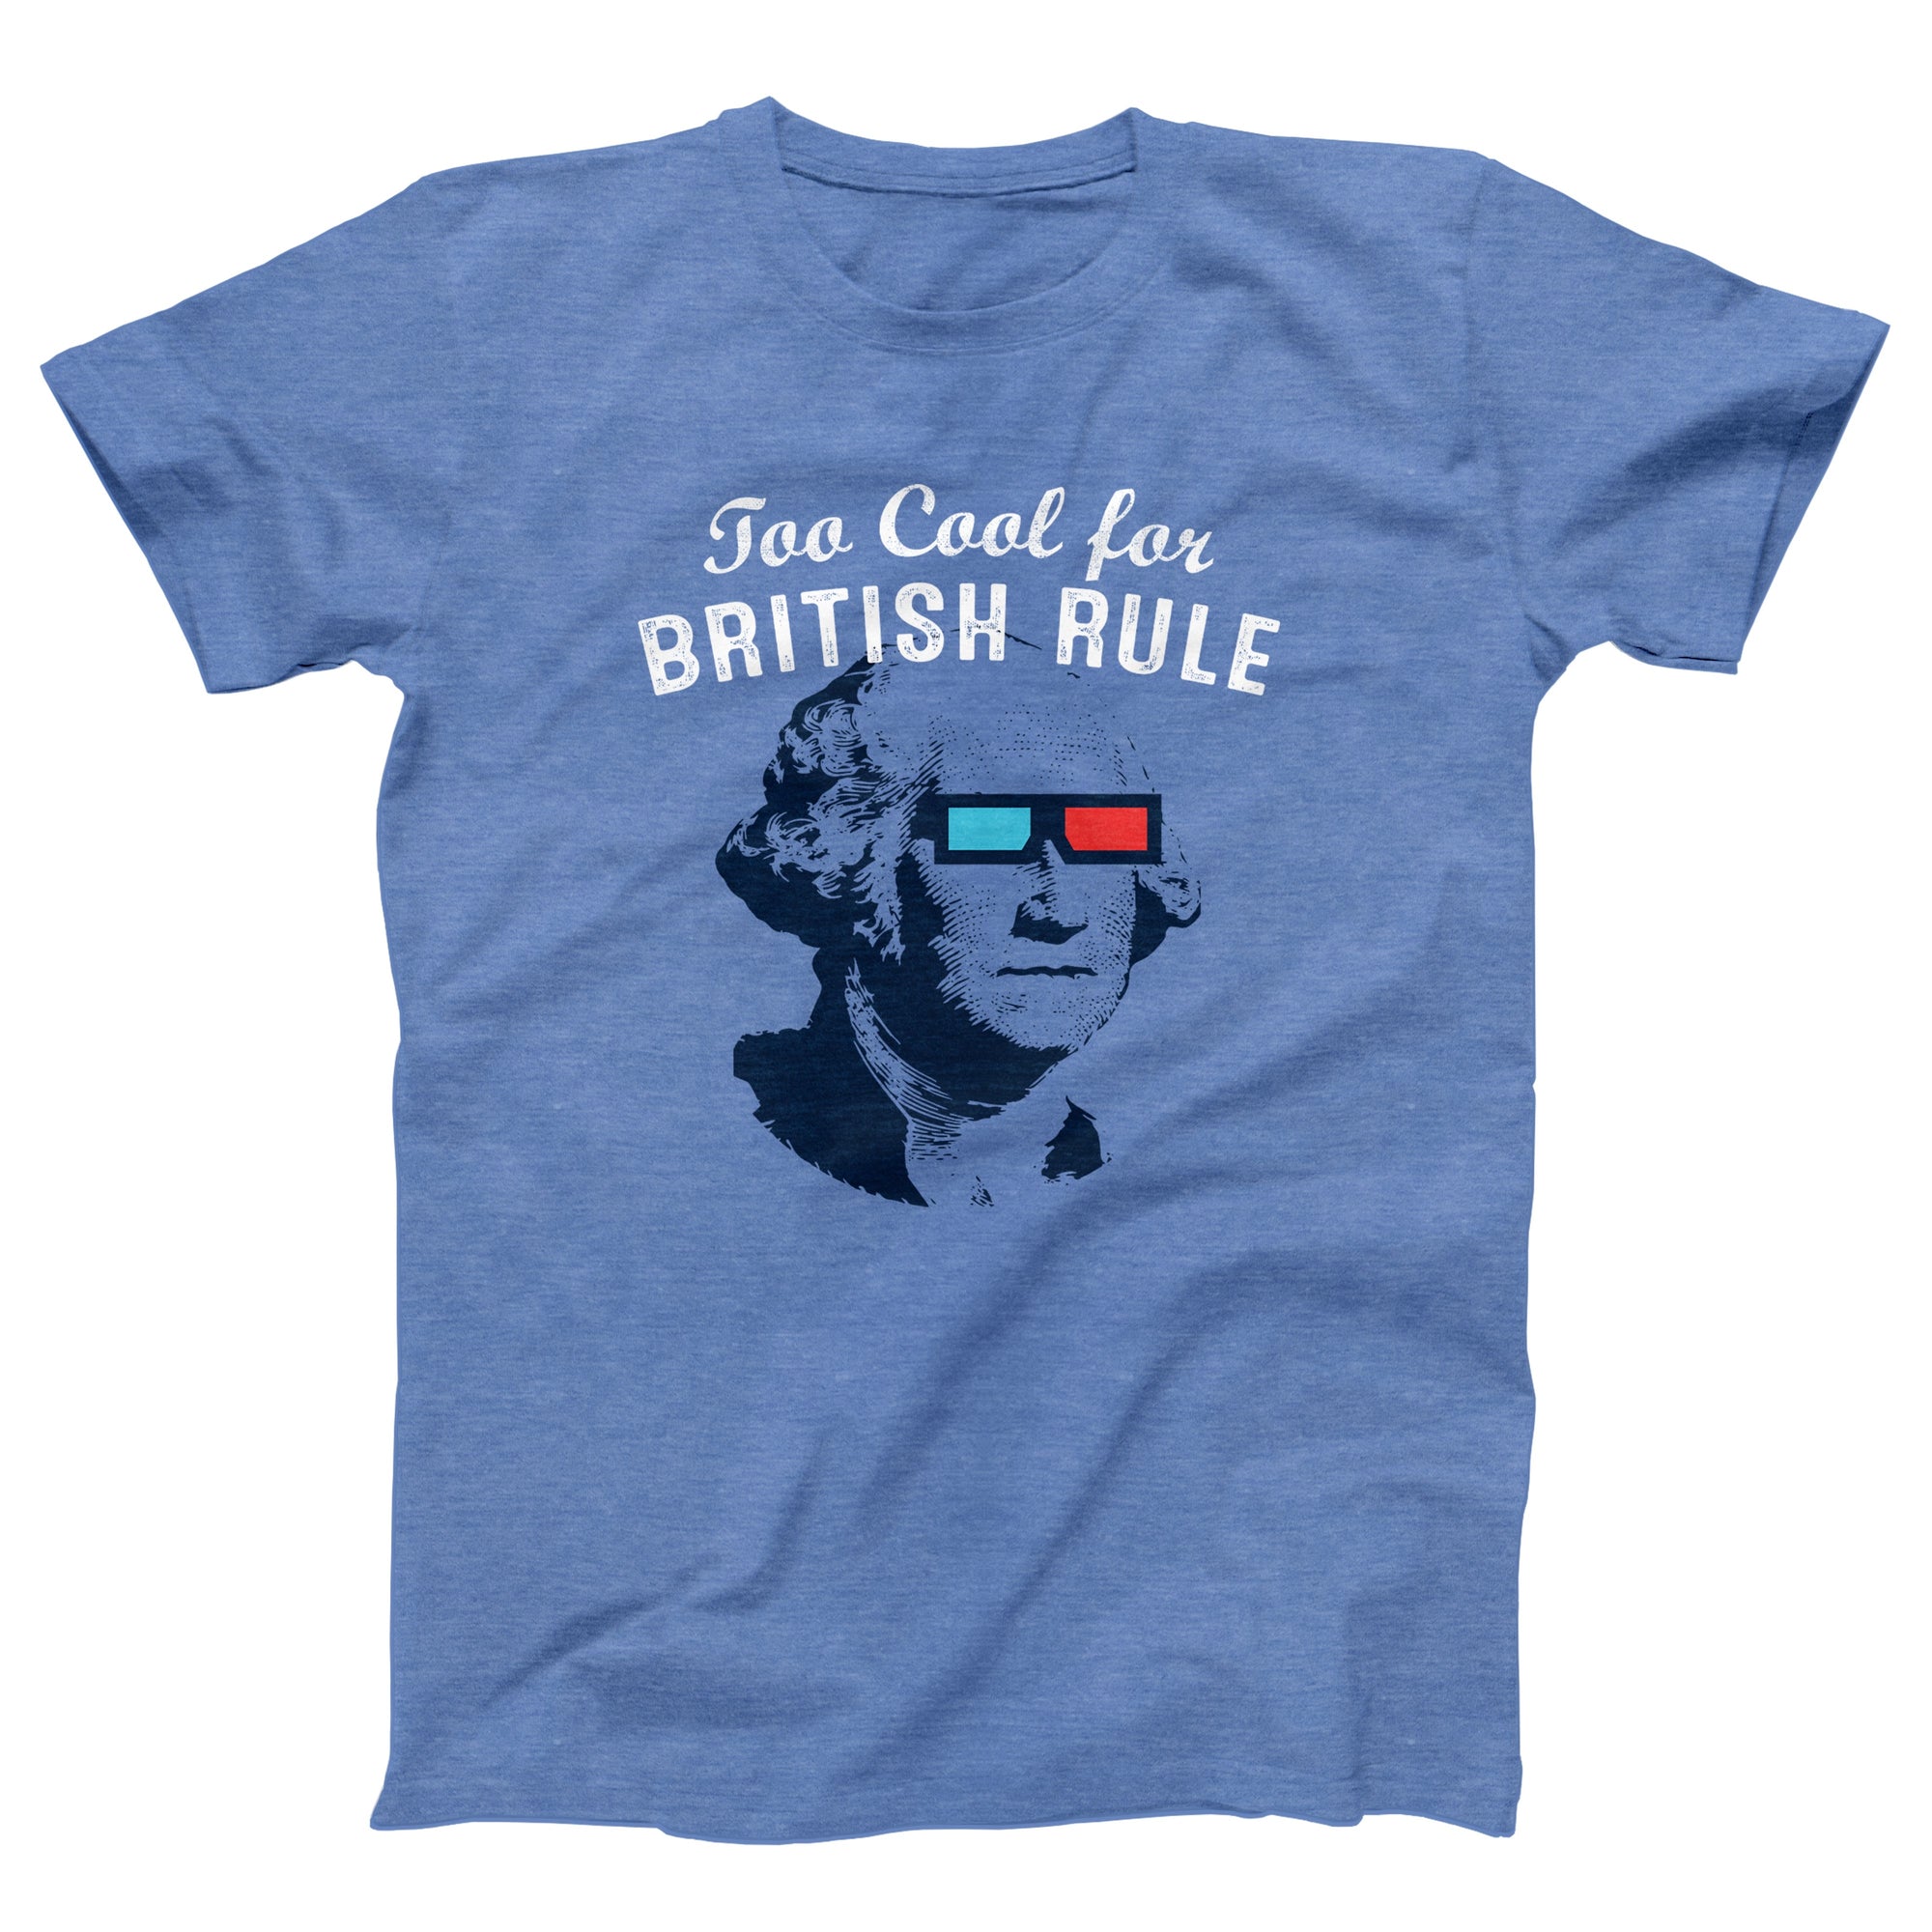 Too Cool for British Rule Adult Unisex T-Shirt - anishphilip